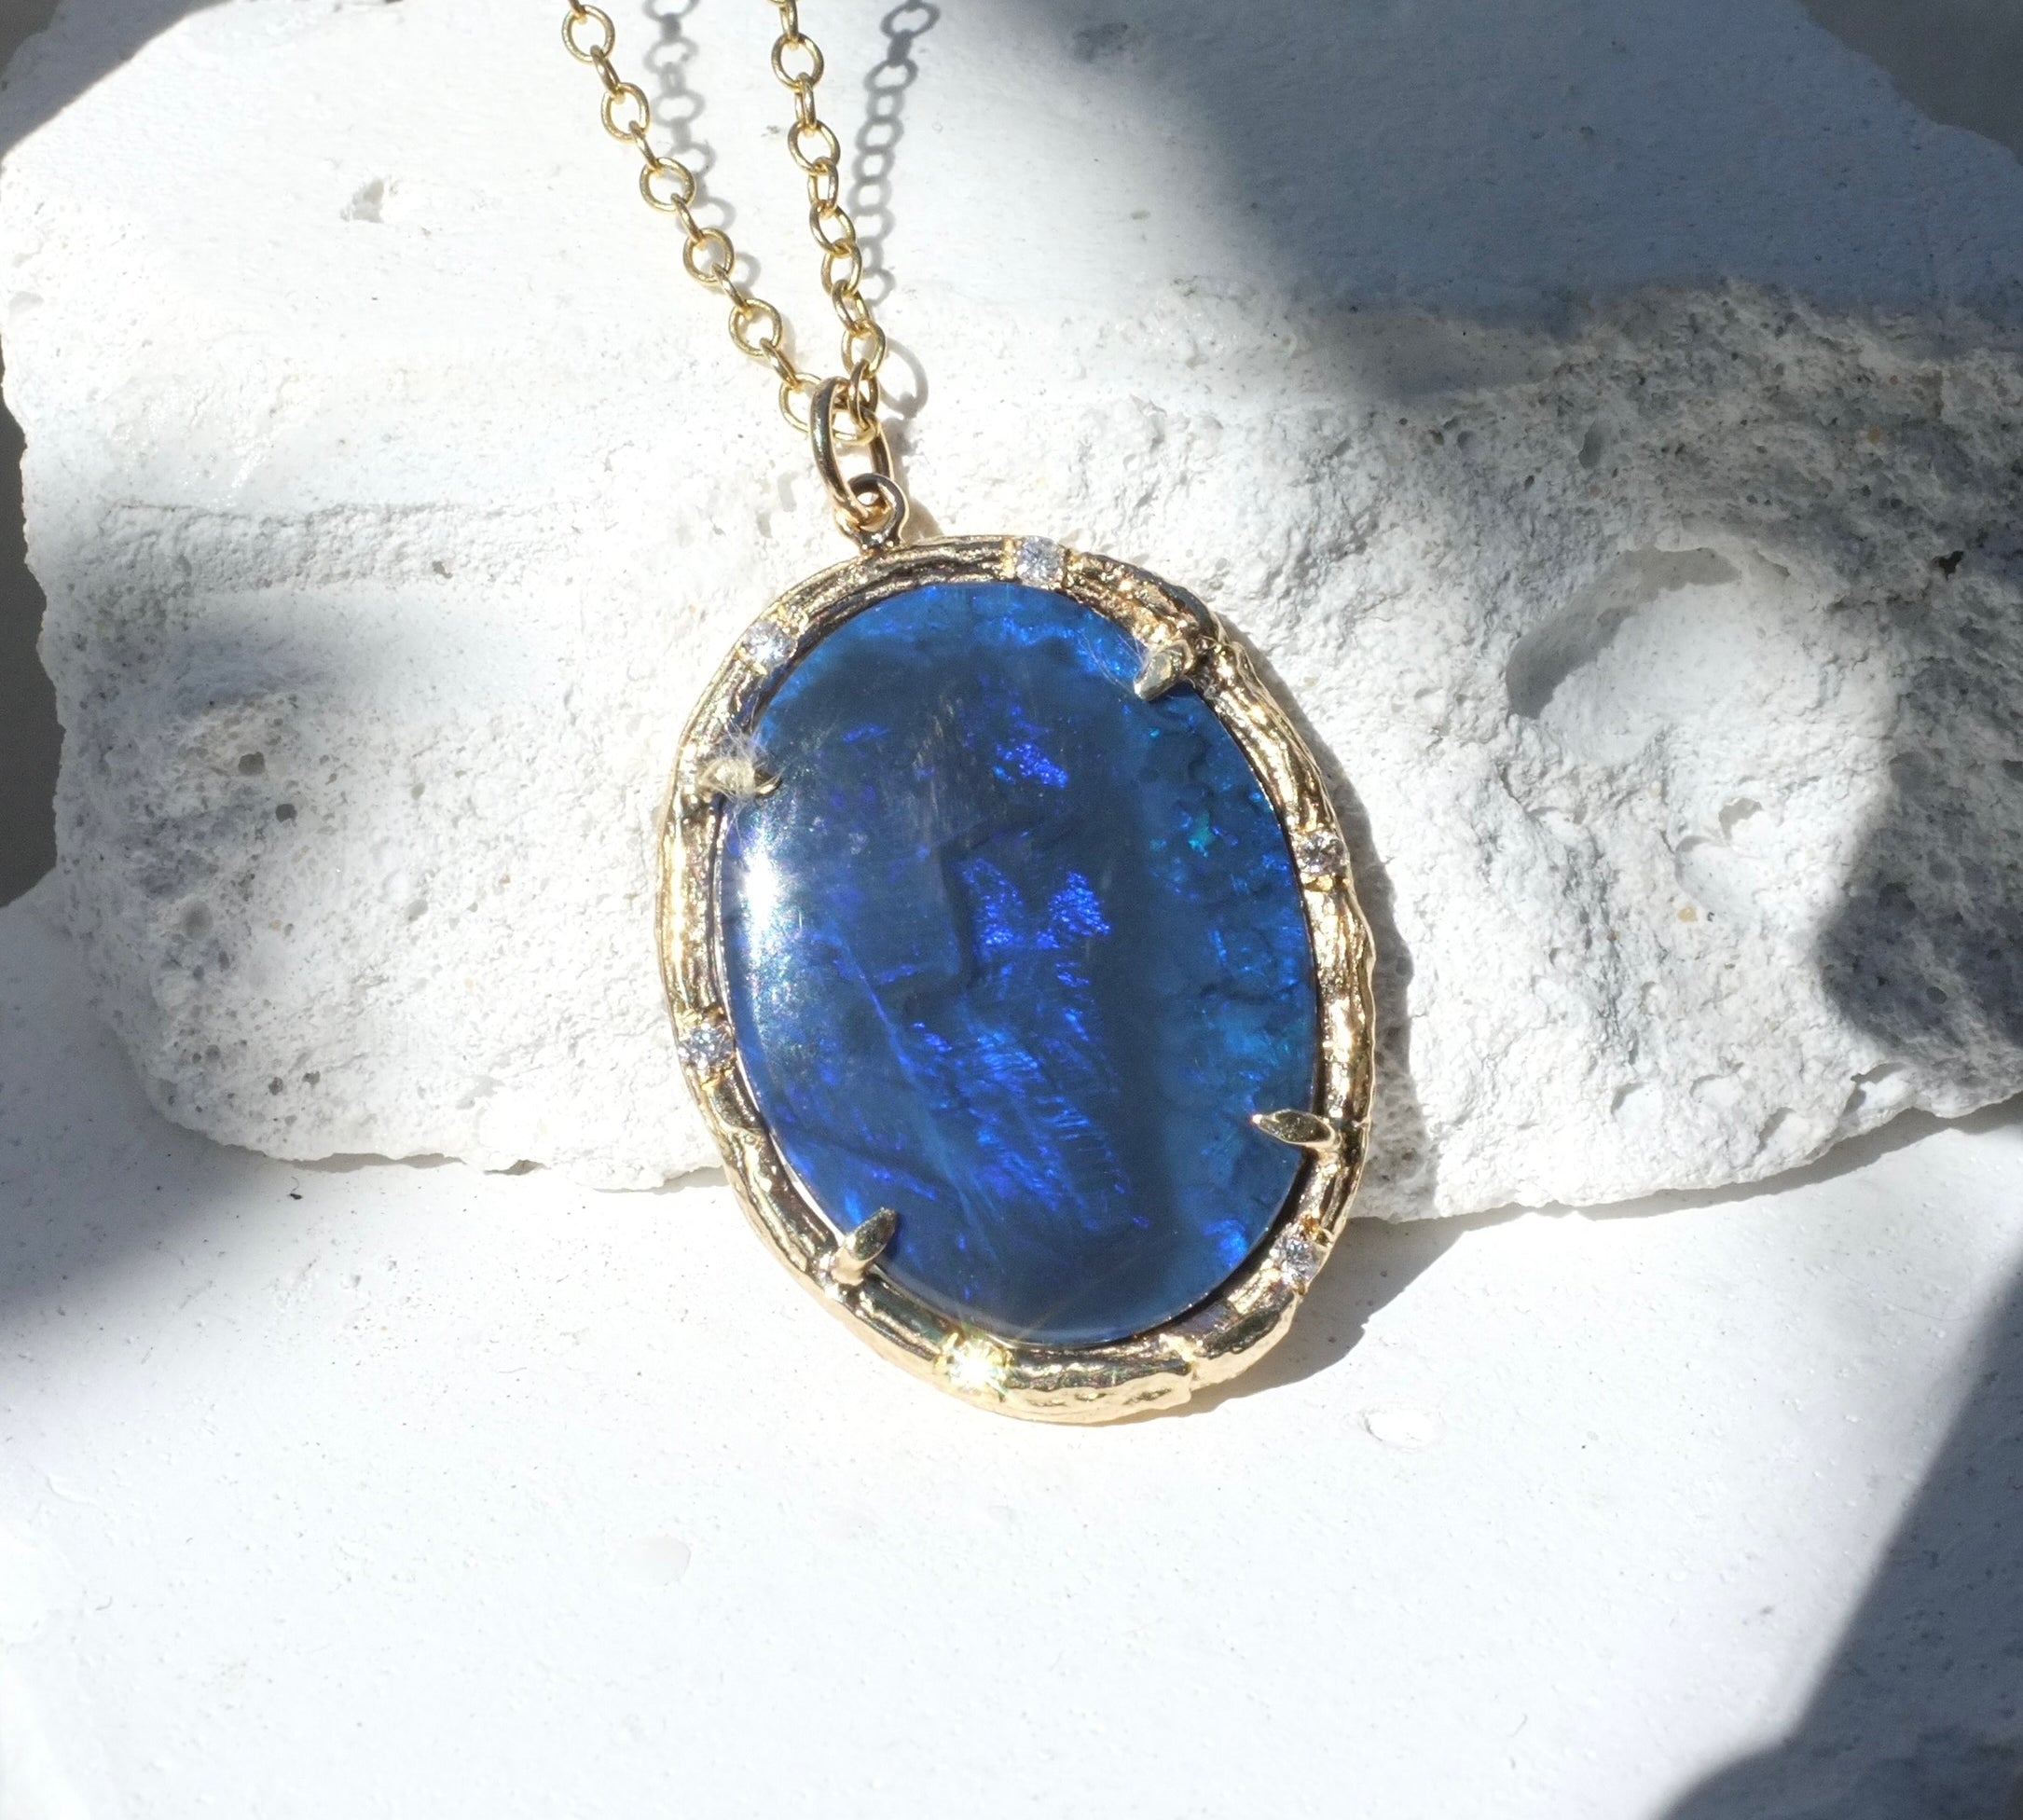 Mythical Blue Opal Necklace Pendant Elisabeth Bell Jewelry   